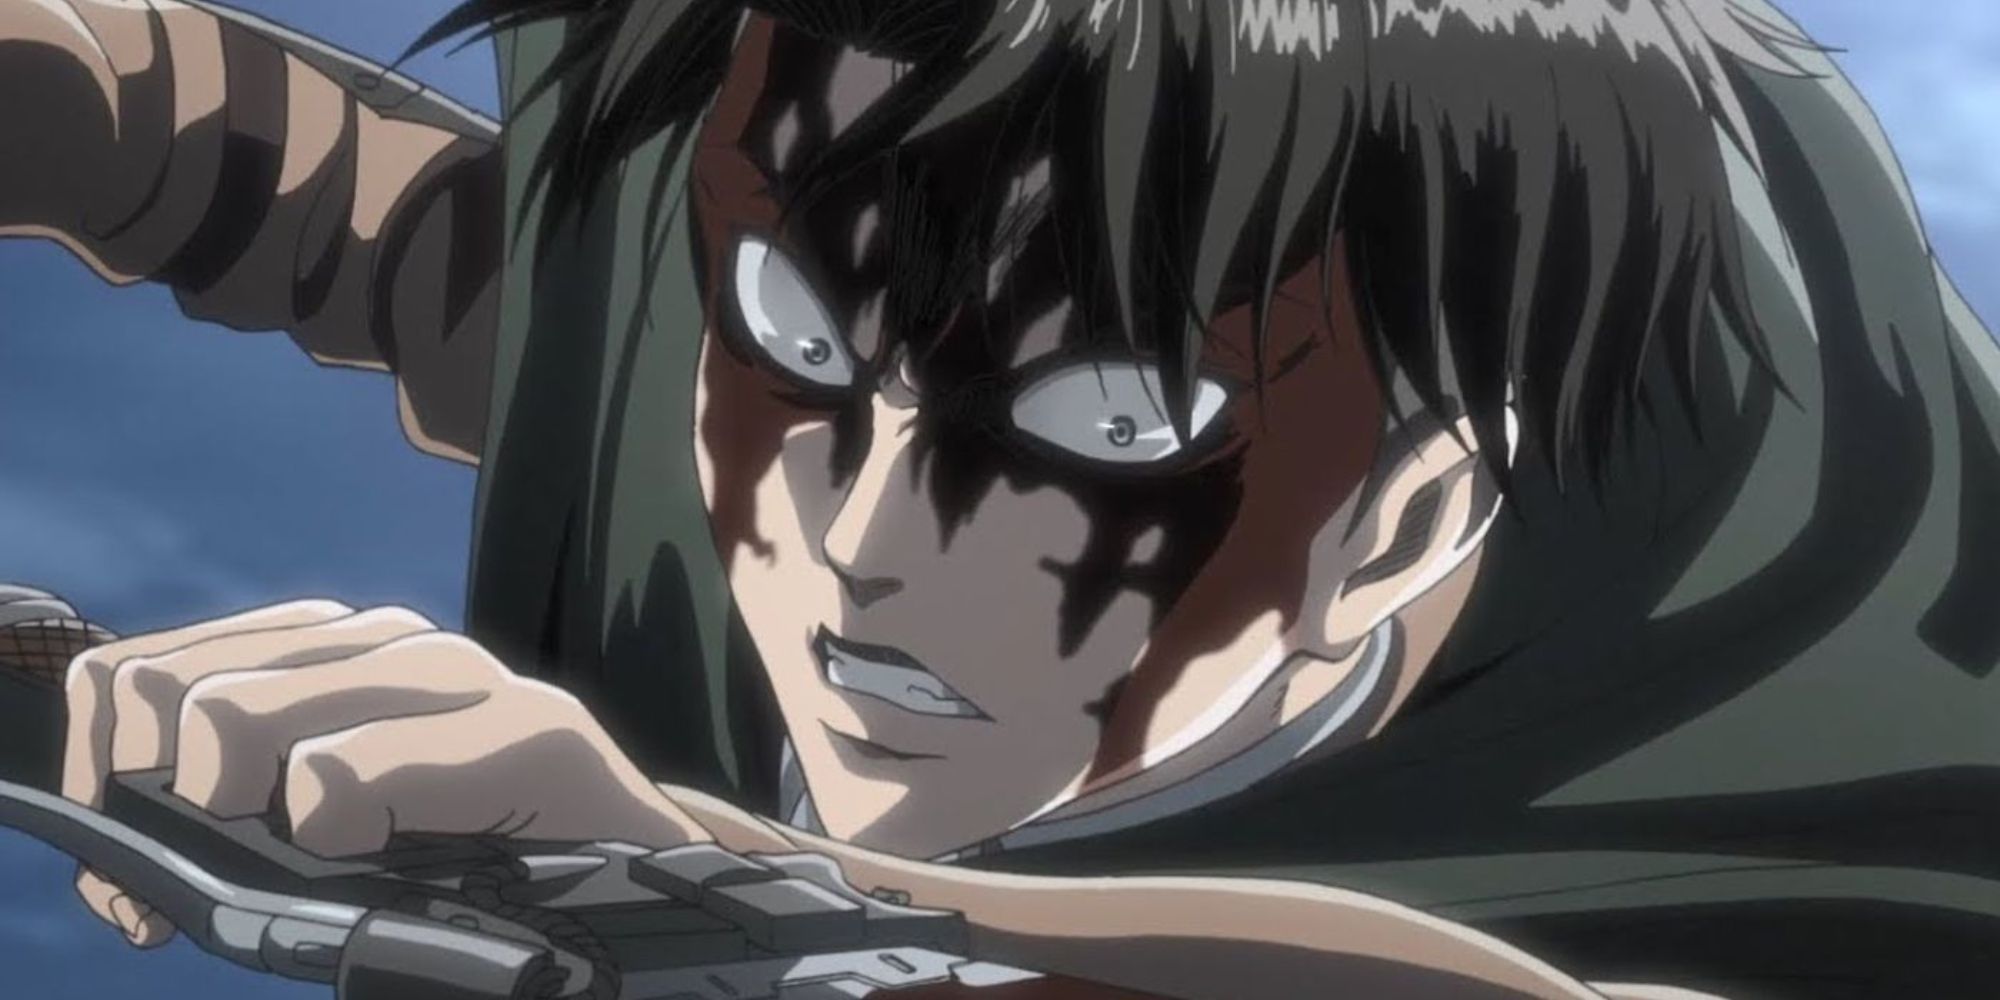 Levi Ackerman fights the monstrous titan Zeke Jaeger in Attack on Titan with blood on his face